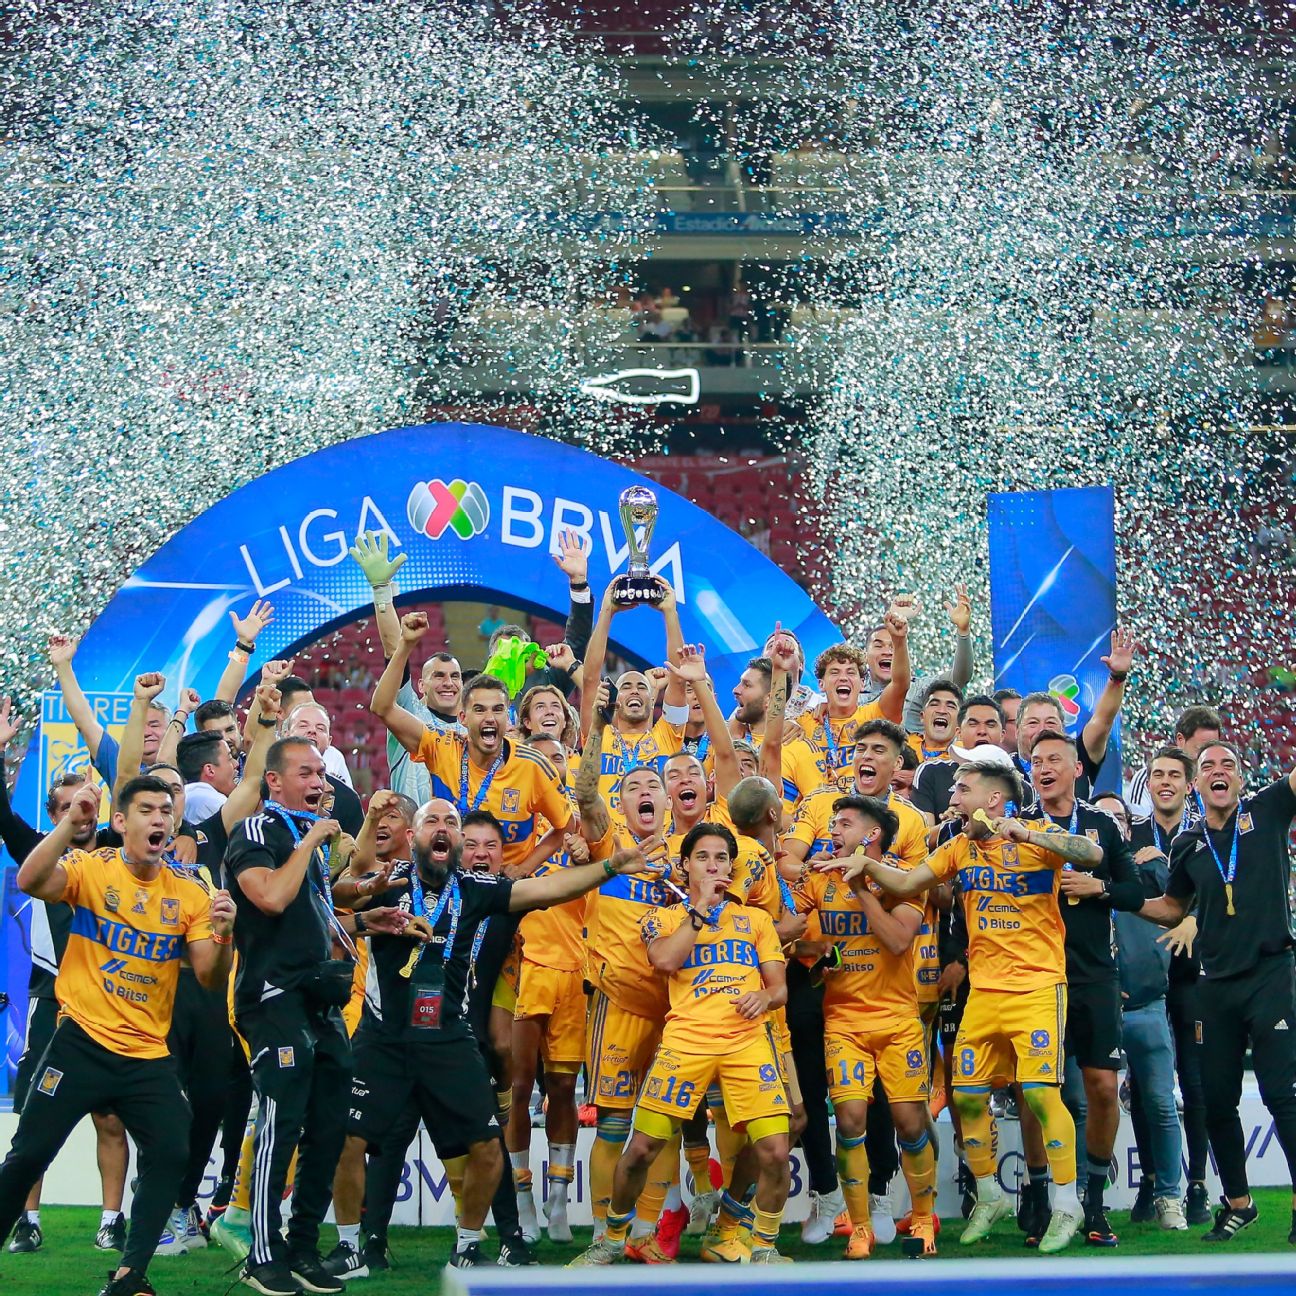 2023 Leagues Cup: LAFC, Chivas, Tigresleading candidates to lift the  trophy - AS USA